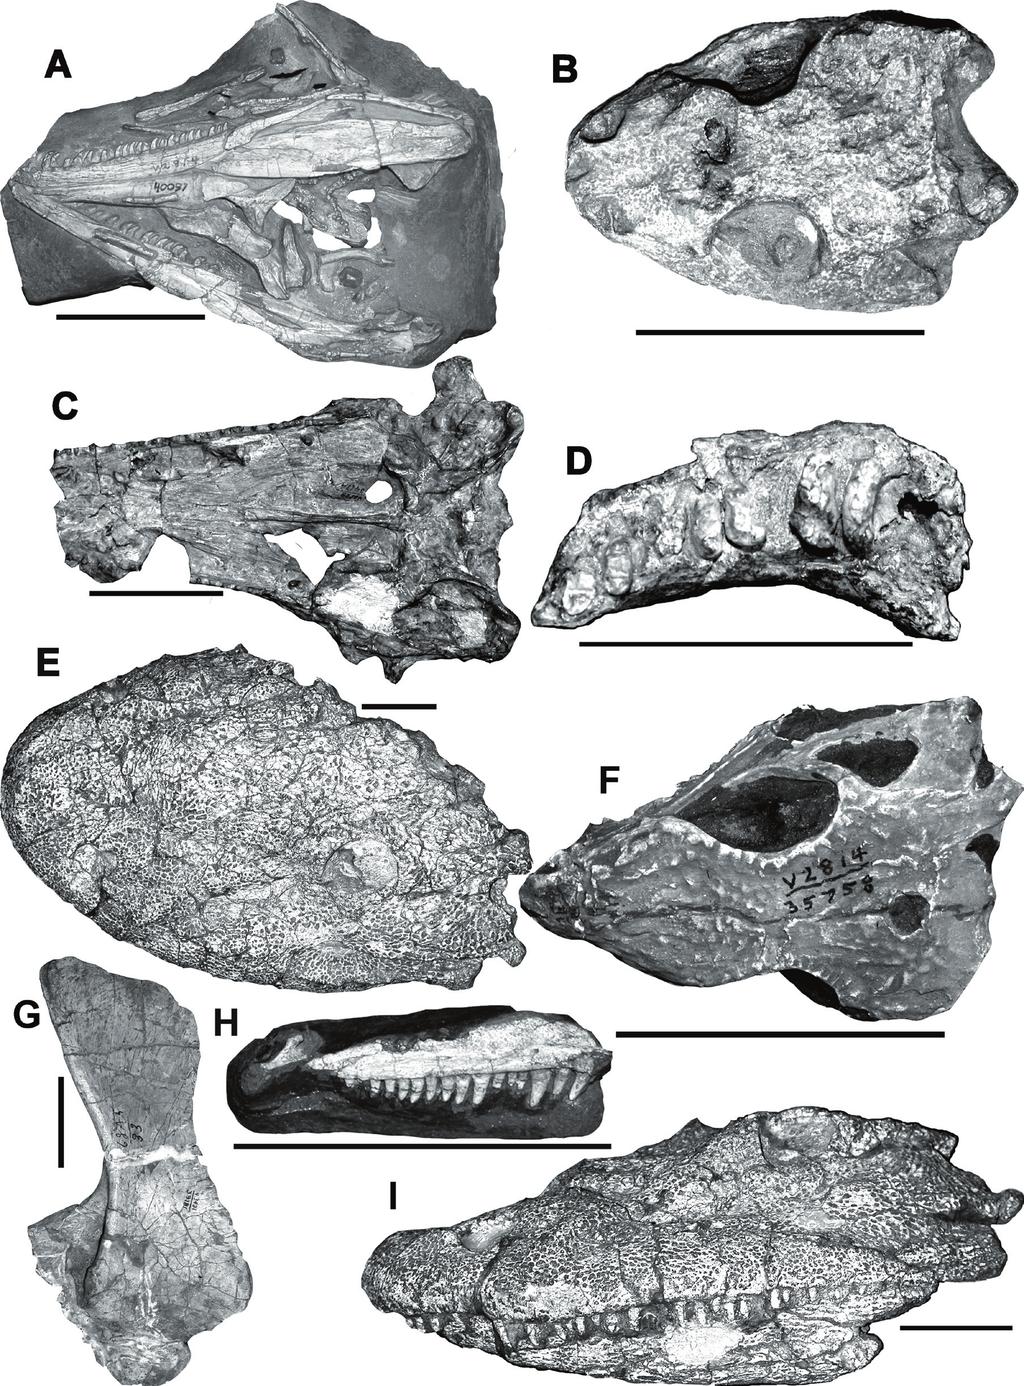 EARLY PERMIAN VERTEBRATE ASSEMBLAGE AT ARROYO DEL AGUA 293 FIGURE 4. Selected fossil vertebrates from the various Arroyo del Agua quarries. A. Skull of the pelycosaur Aerosaurus wellesi (UCMP 40087) in ventral view, collected from the Camp quarry.